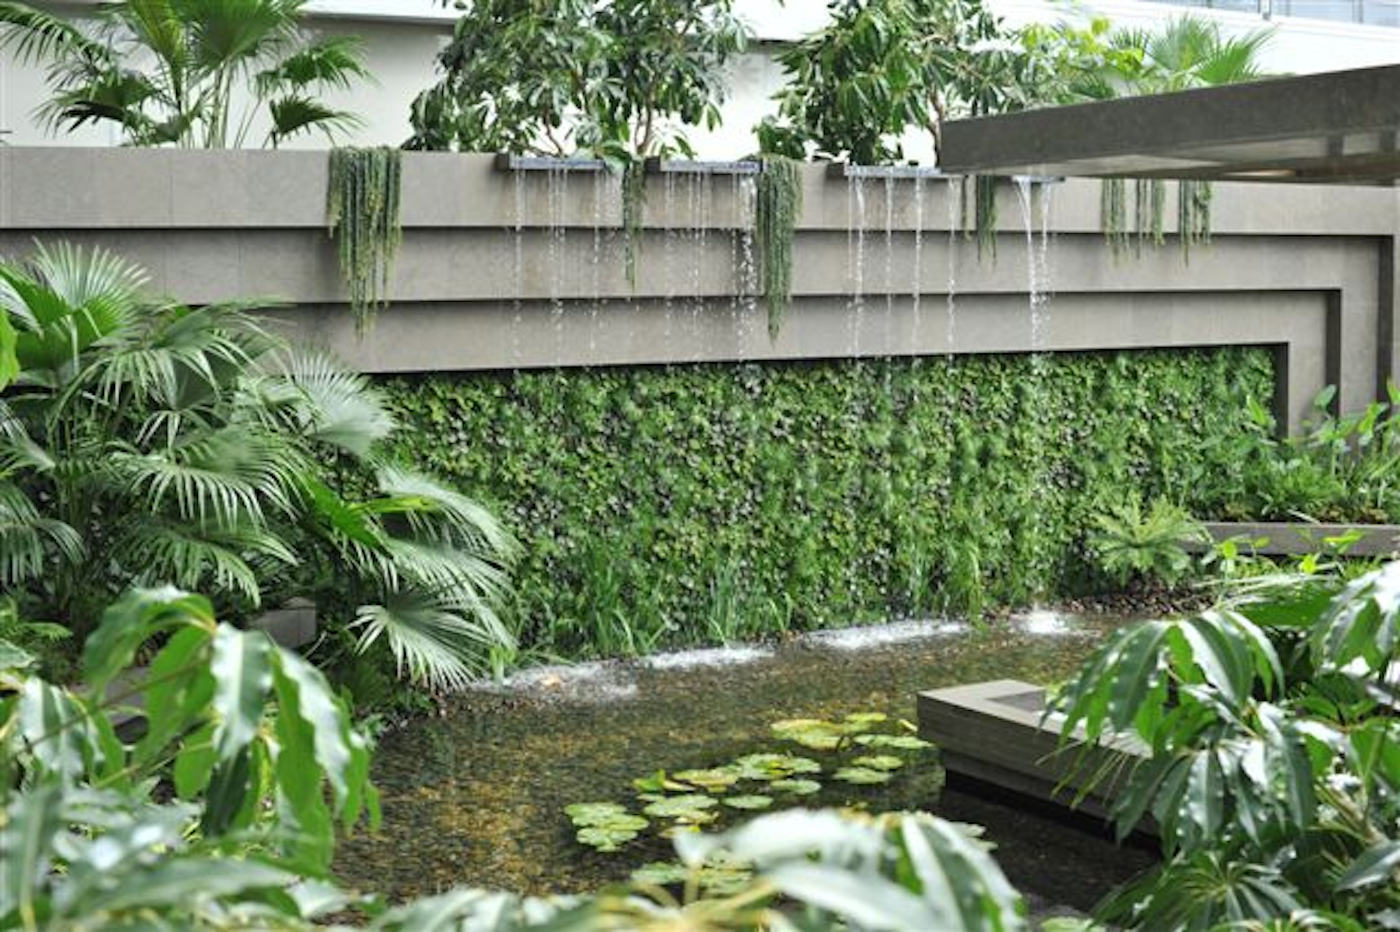 Livng Wall and Waterfall at Chelsea Flower Show